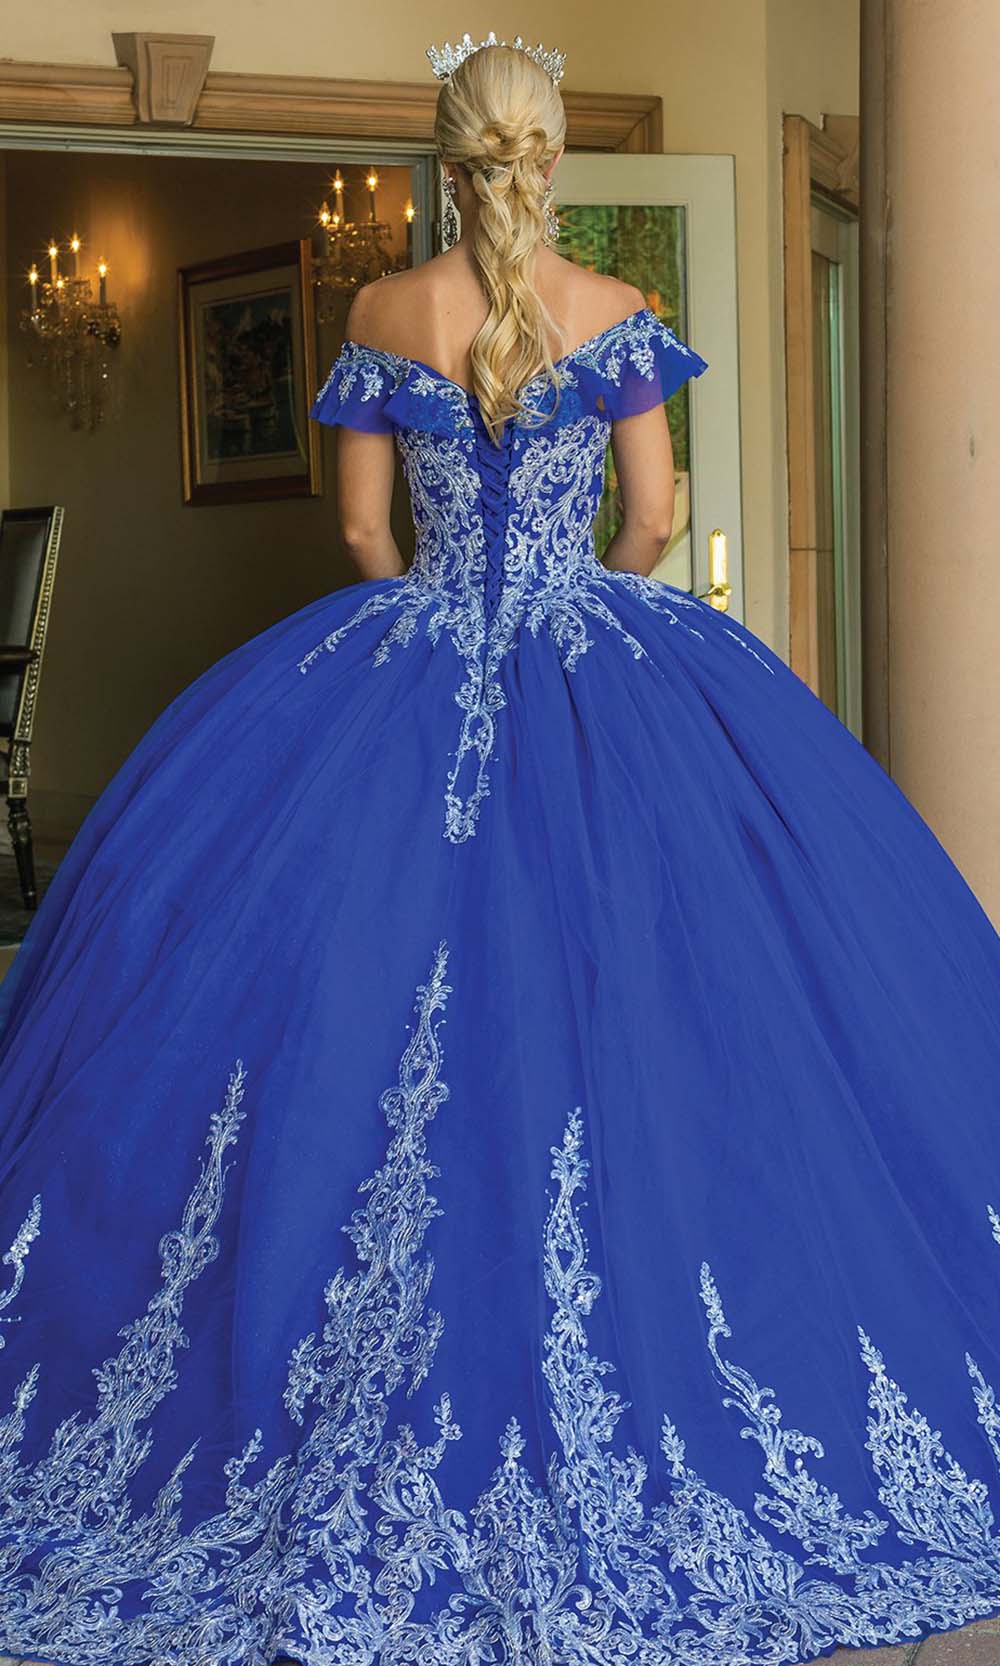 Dancing Queen - 1615 Stunning Embroidered Off Shoulder Gown In Blue